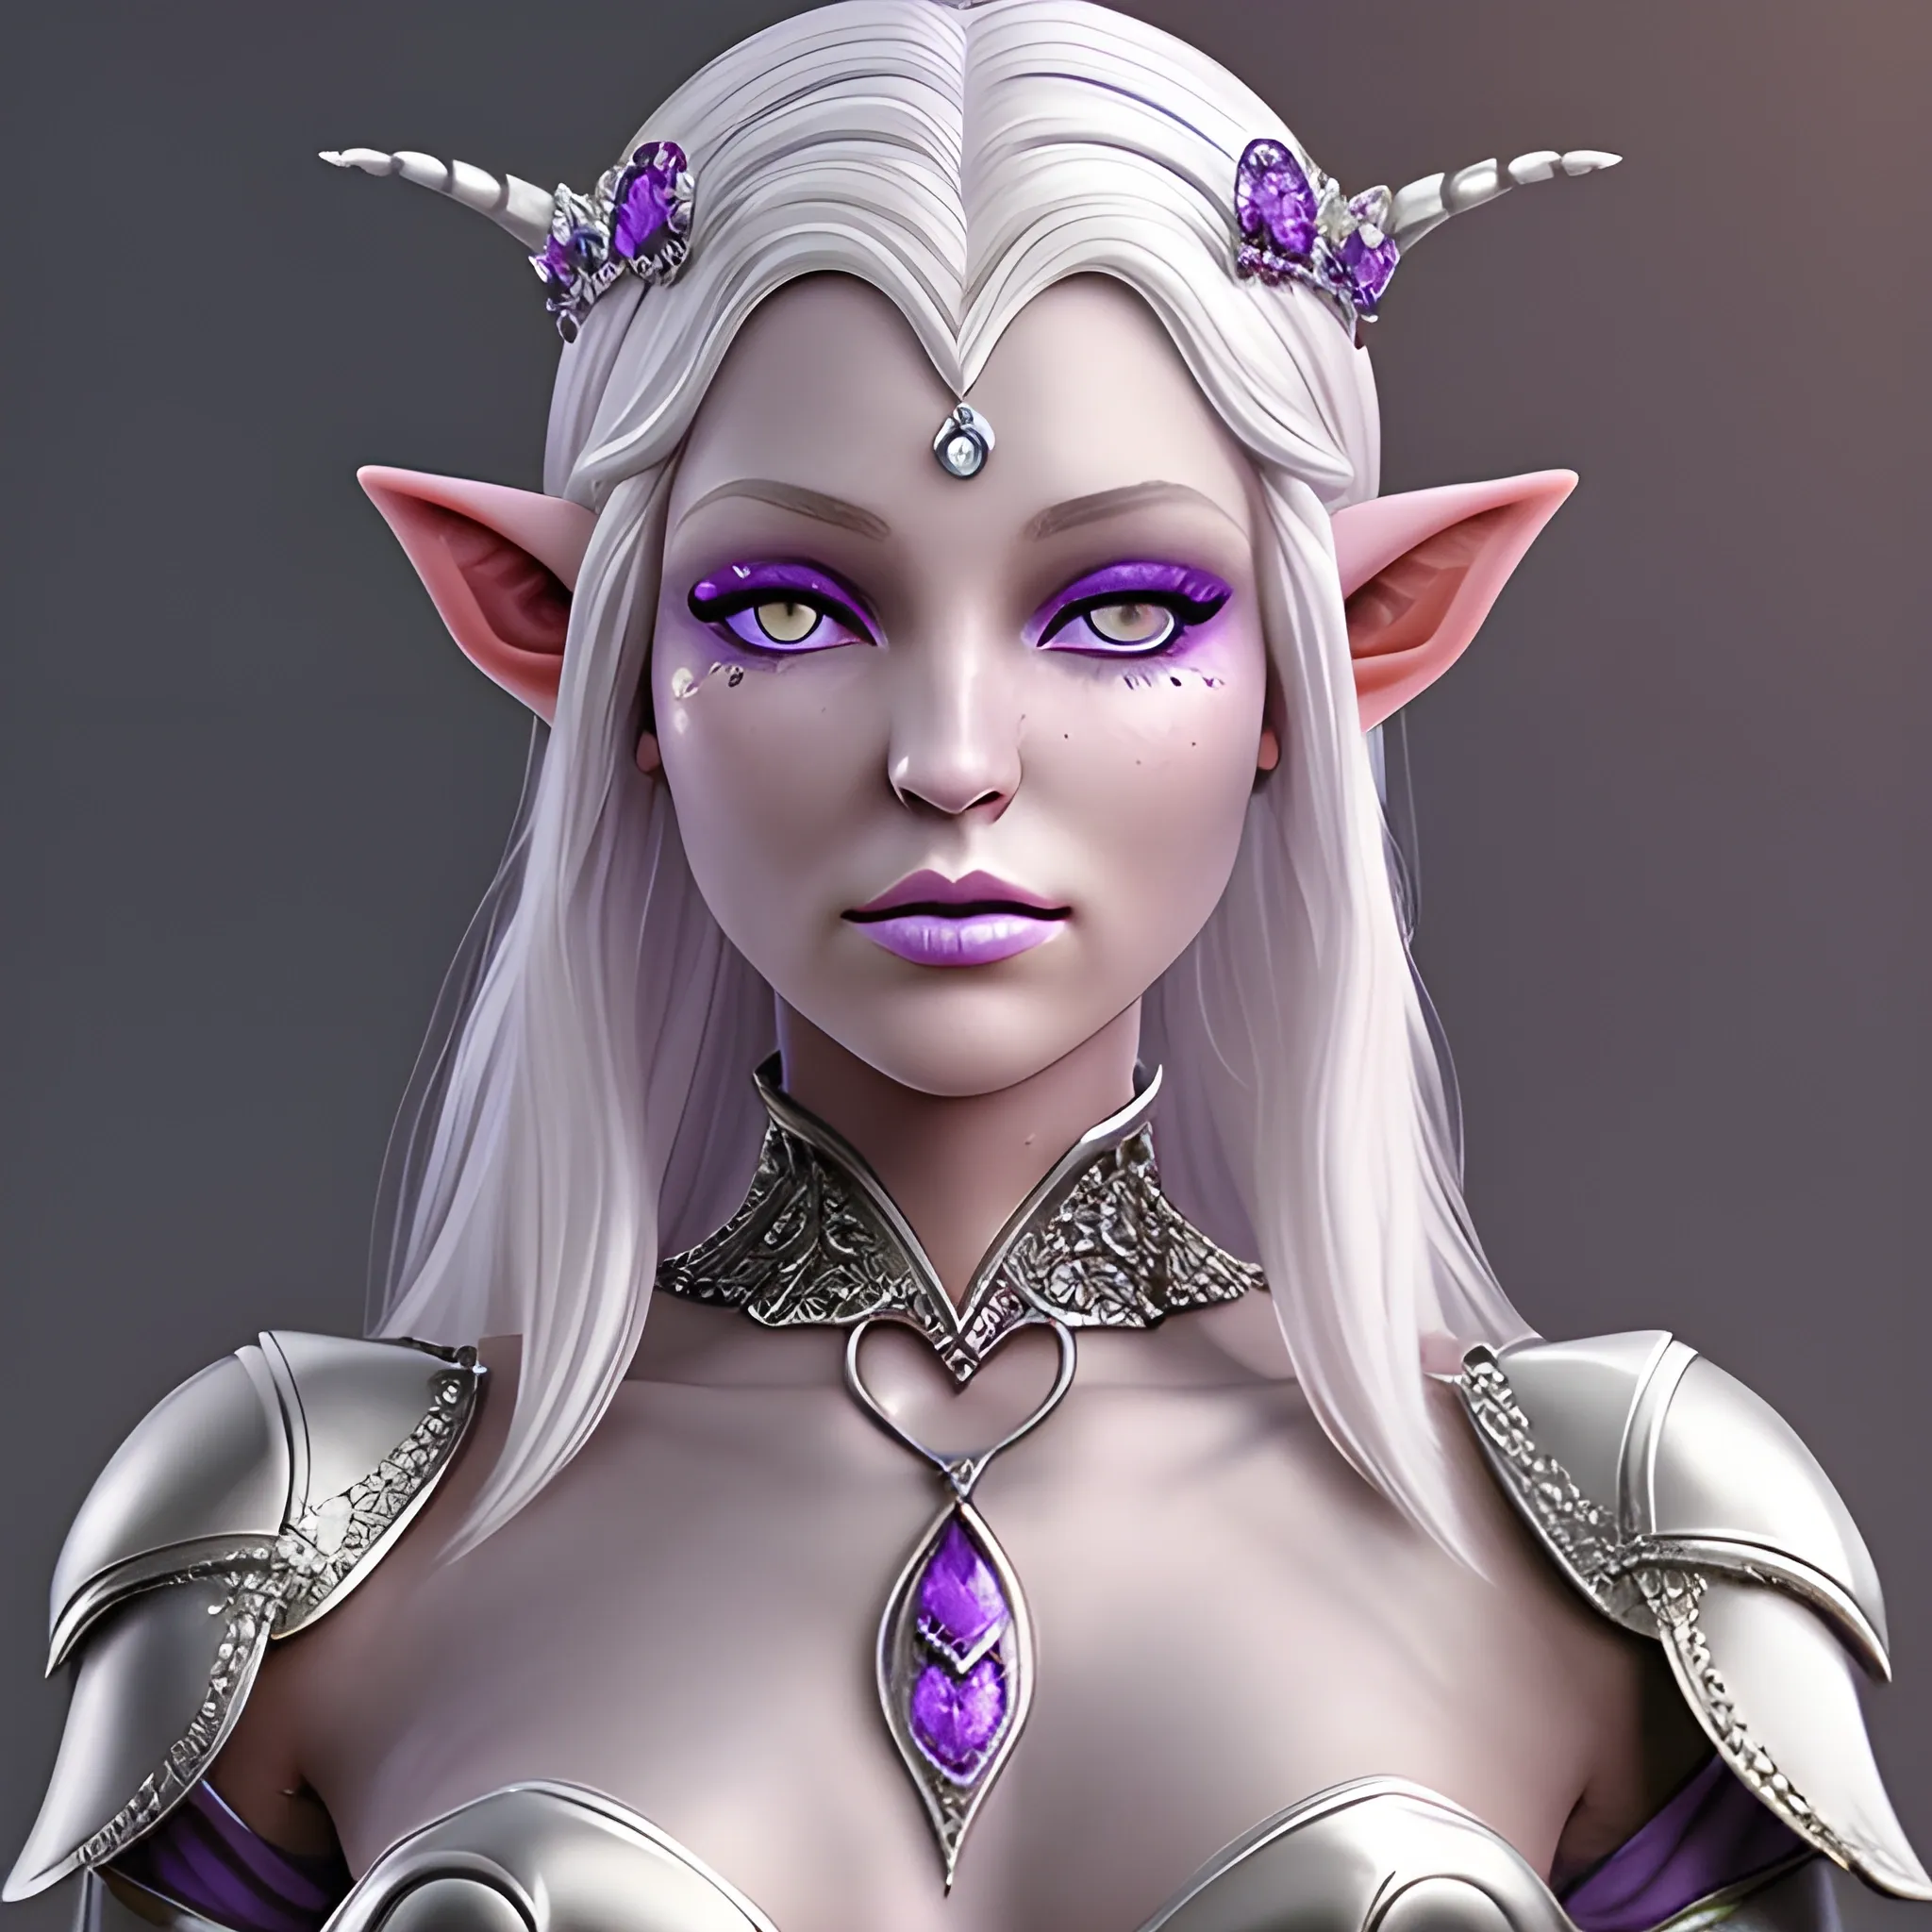 fantasy female elf with silver hair and purple eyes. Jeweled ears and body. Dewy skin, soft features queenly